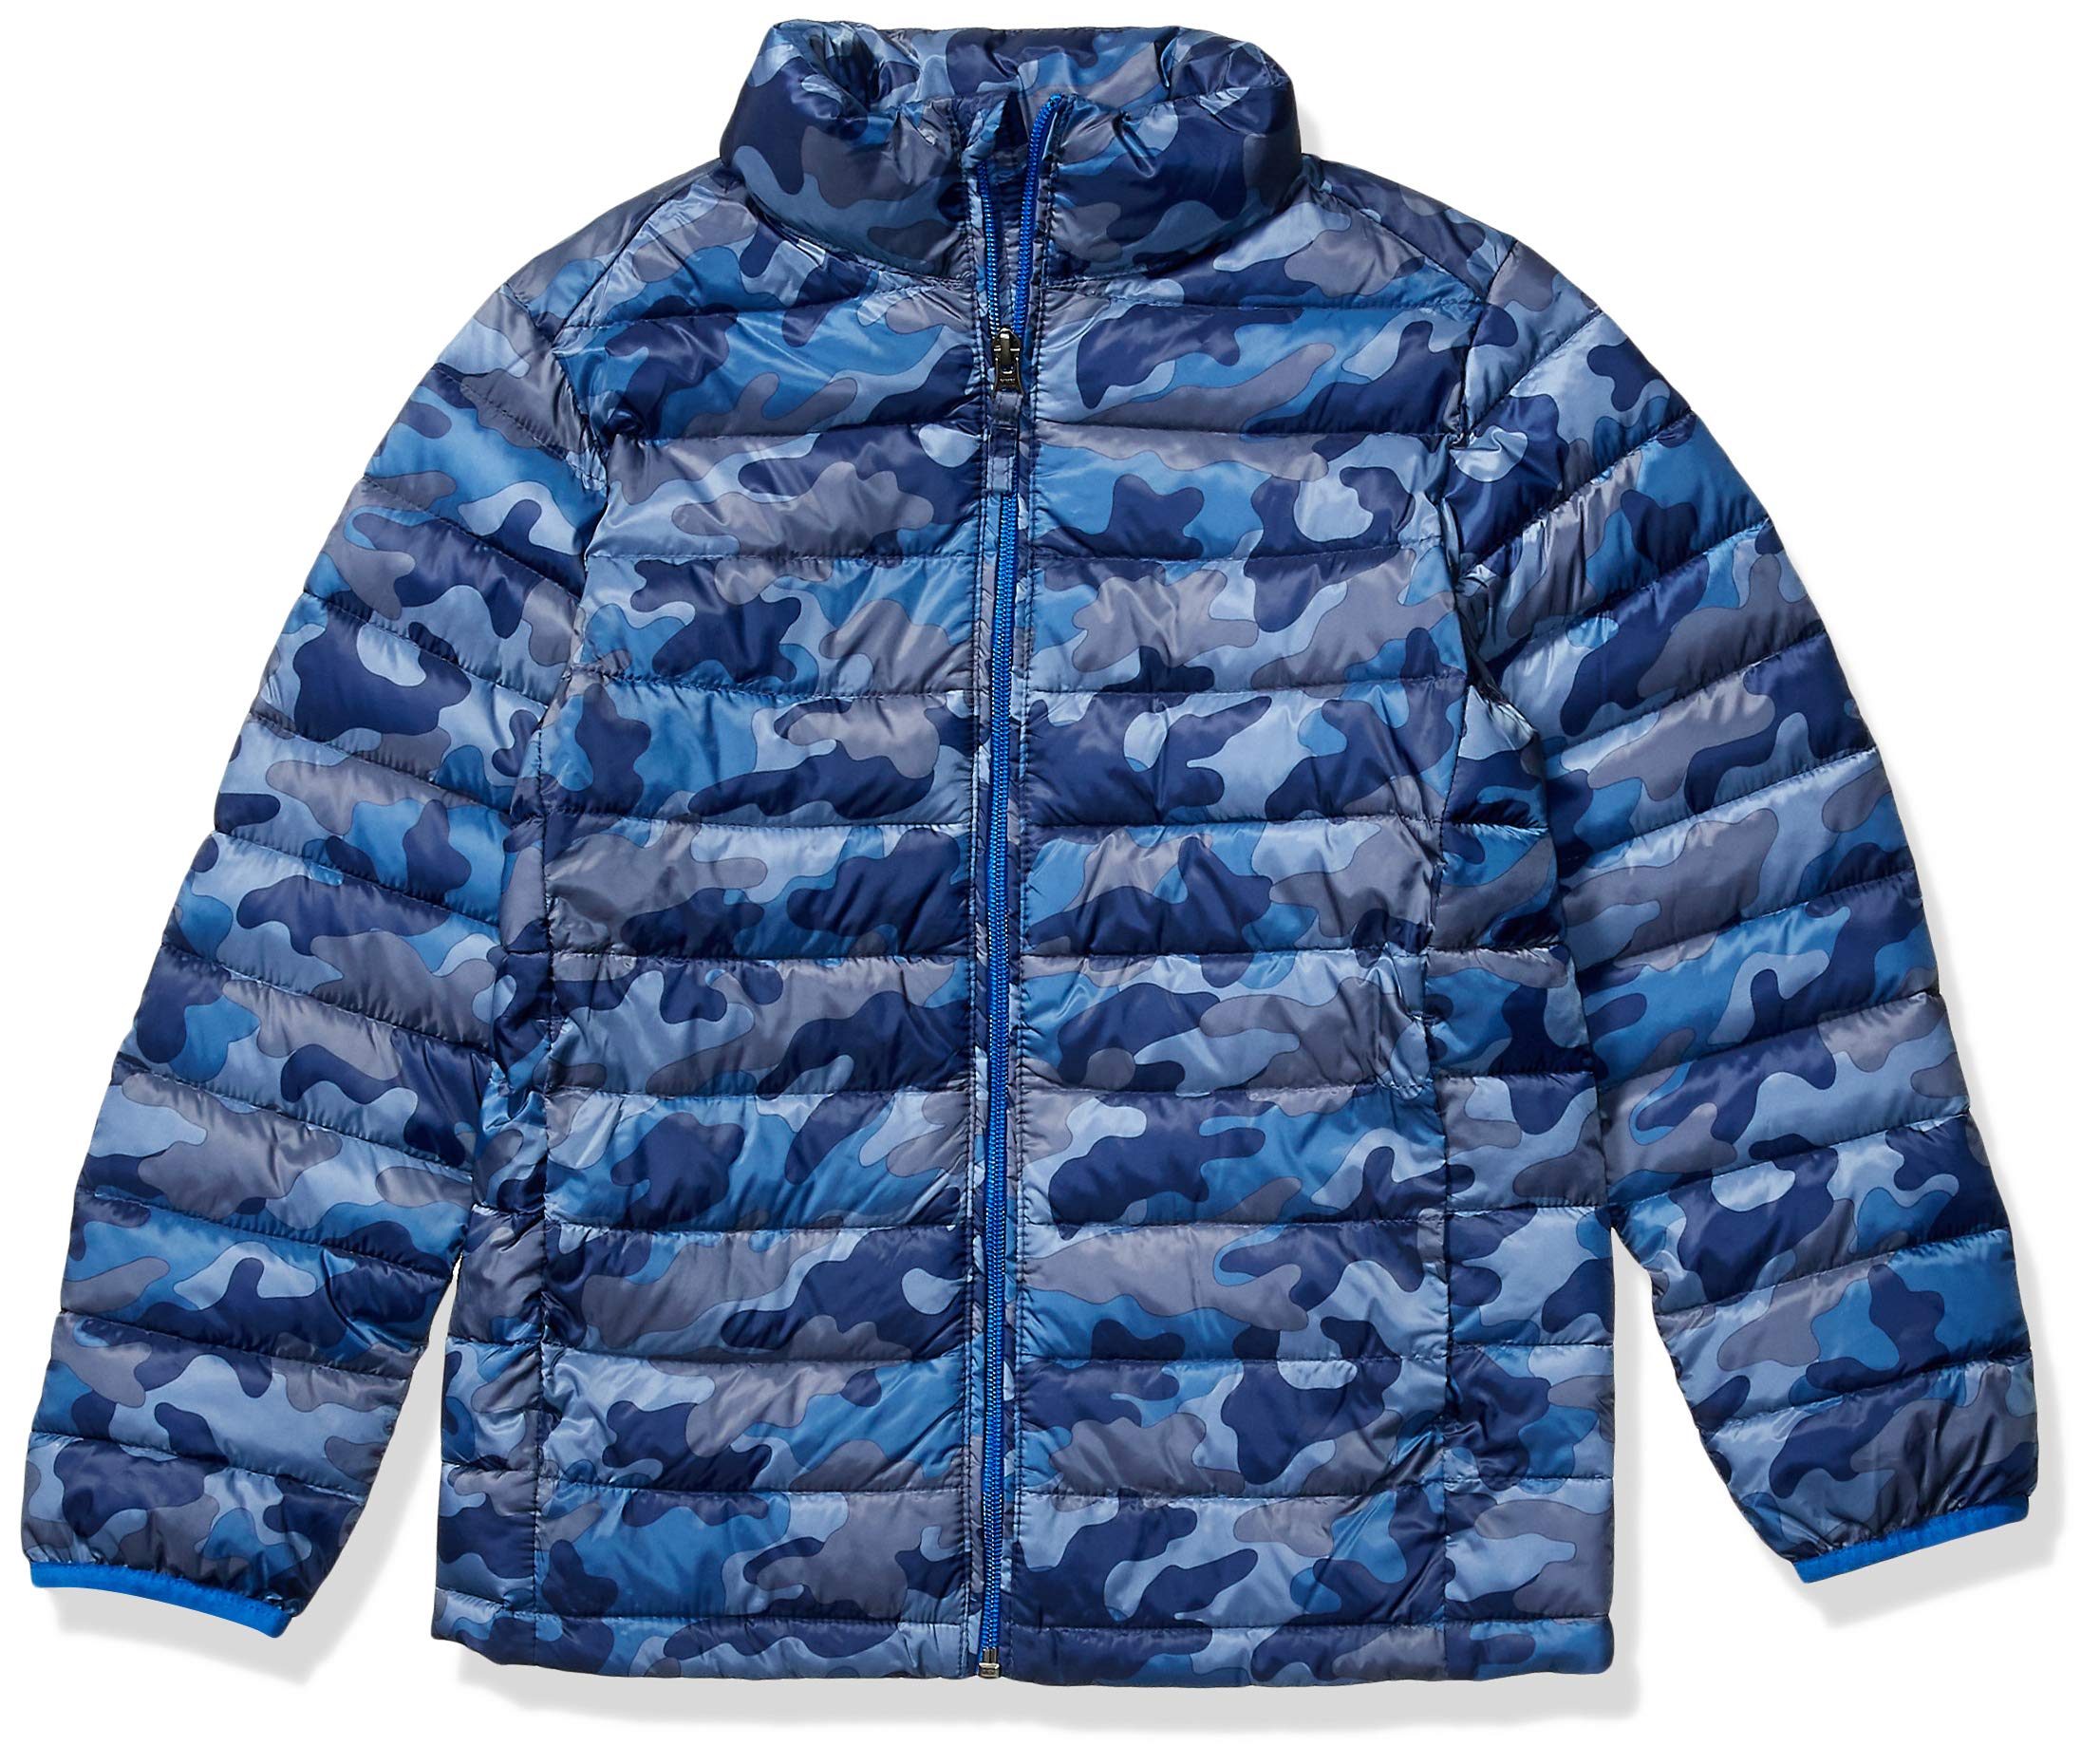 Amazon Essentials Boys and Toddlers' Lightweight Water-Resistant Packable Puffer Jacket